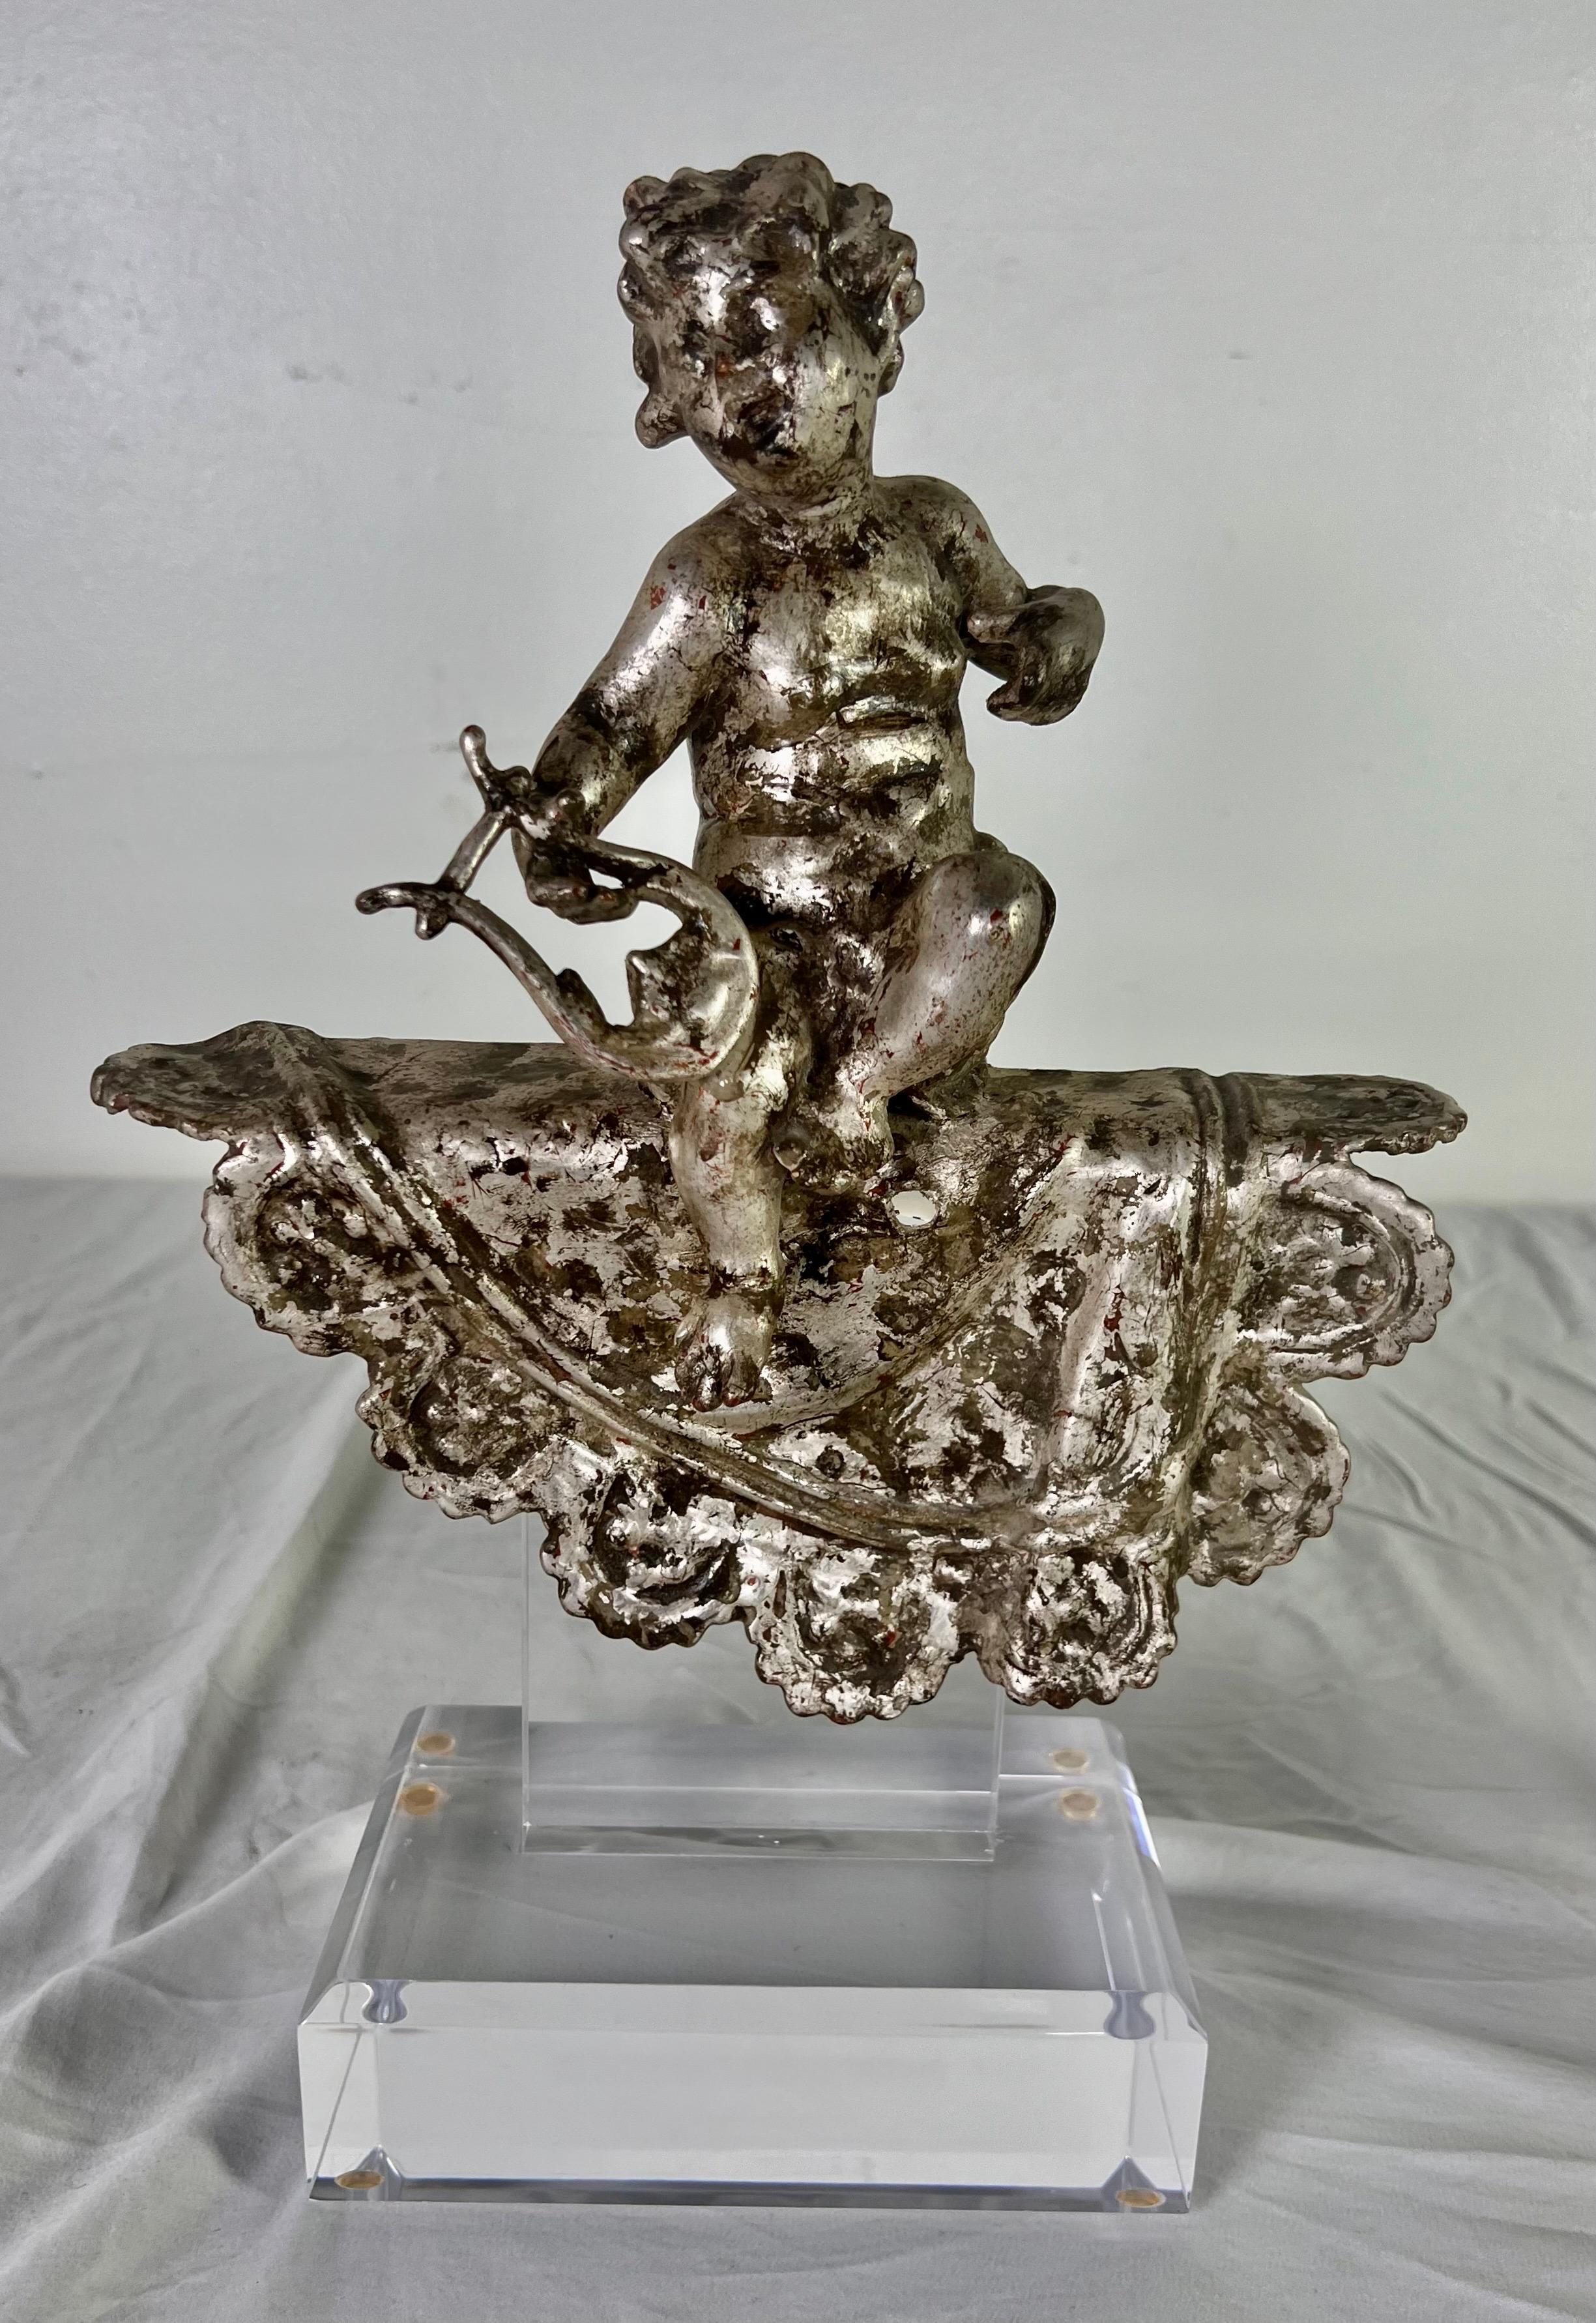 Pair of silvered gilt metal architectural elements depicting cherubs.  The cherubs are mounted on a lucite base and are ready for your home.